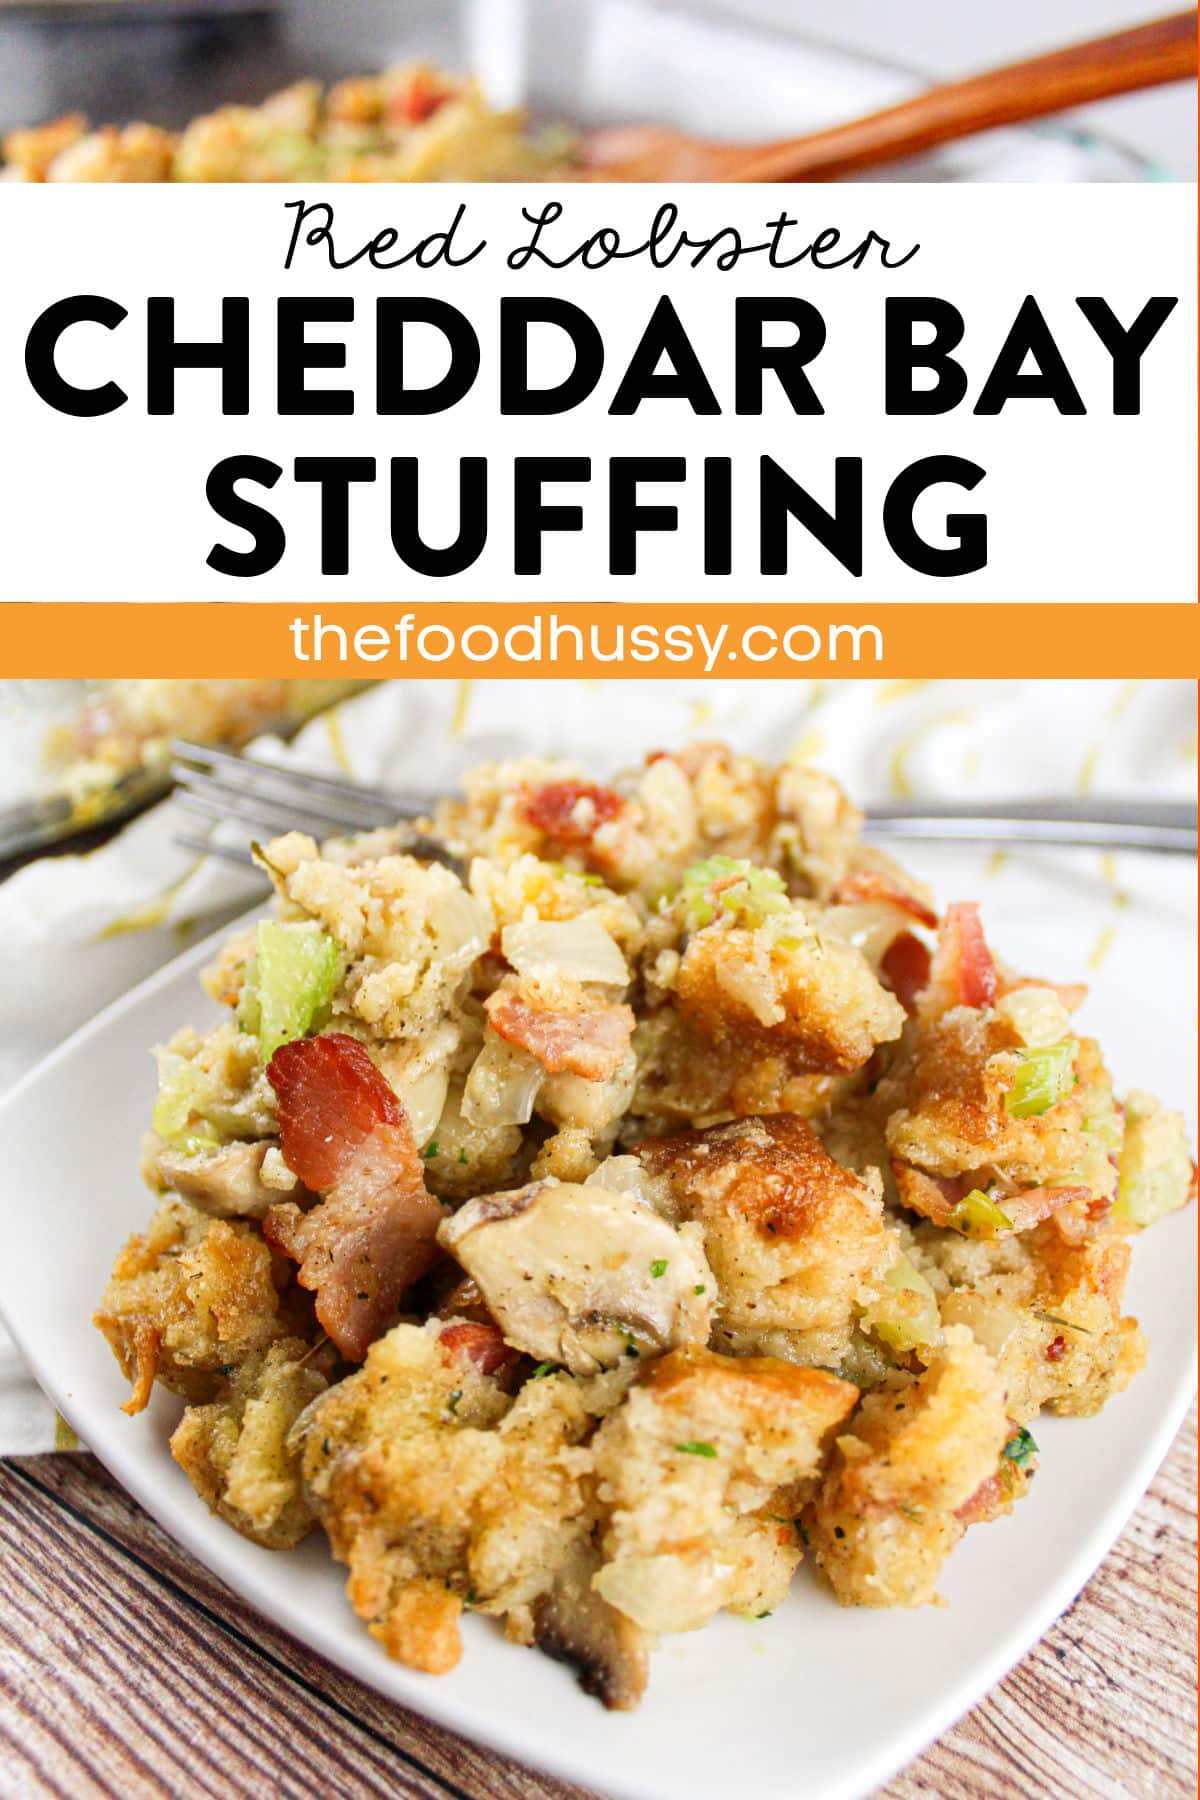 This copycat recipe for Red Lobster Cheddar Bay Stuffing has all the flavors you love about stuffing with the addition of those cheesy garlicky buttery Cheddar Bay Biscuits! Stuffing everyone will ask for again and again!  via @foodhussy